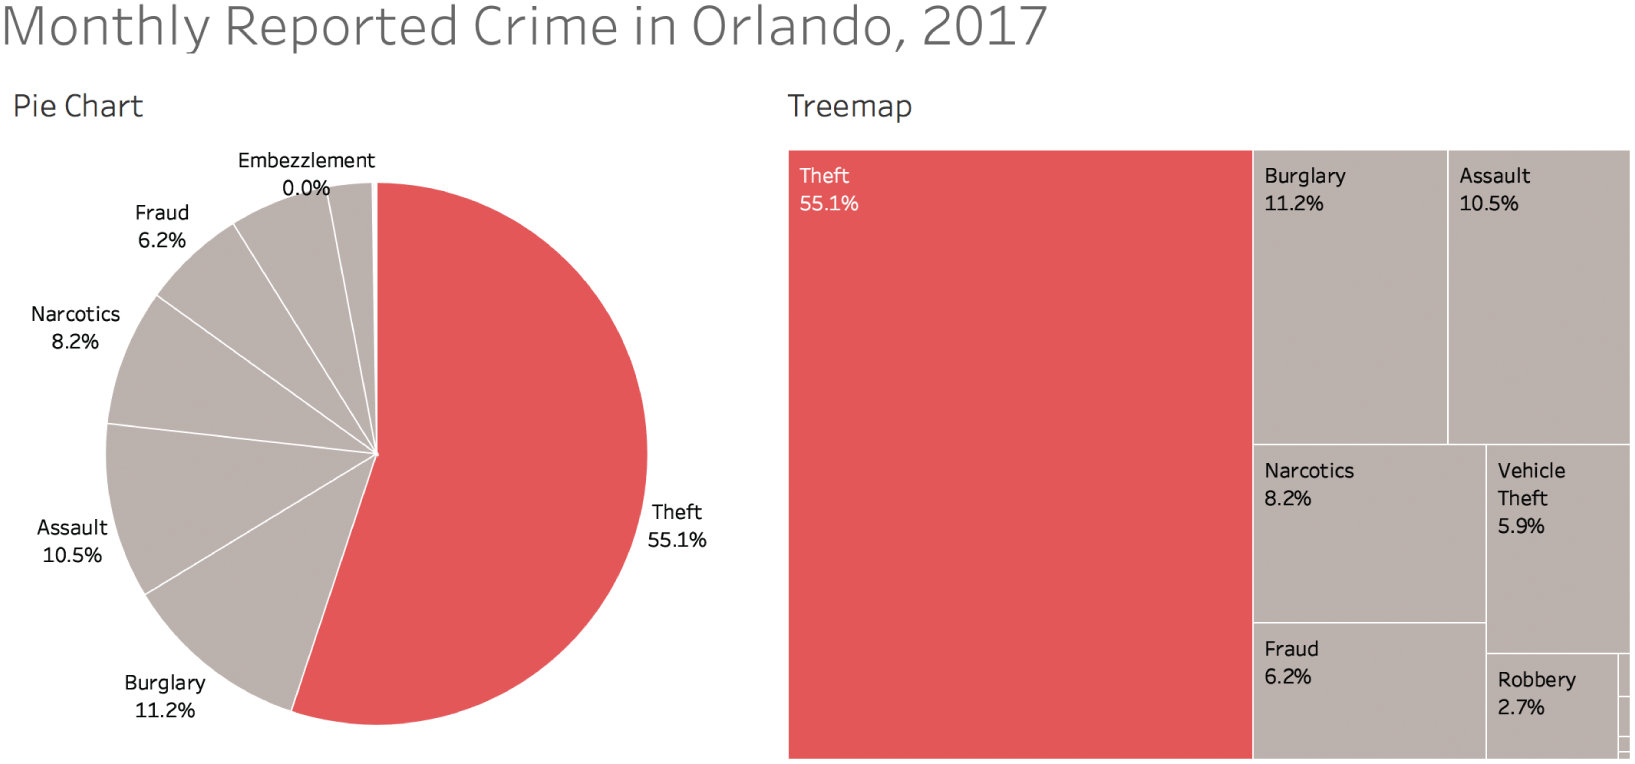 A pie chart and a treemap depicting the breakdown of reported crime by category for the year 2017.